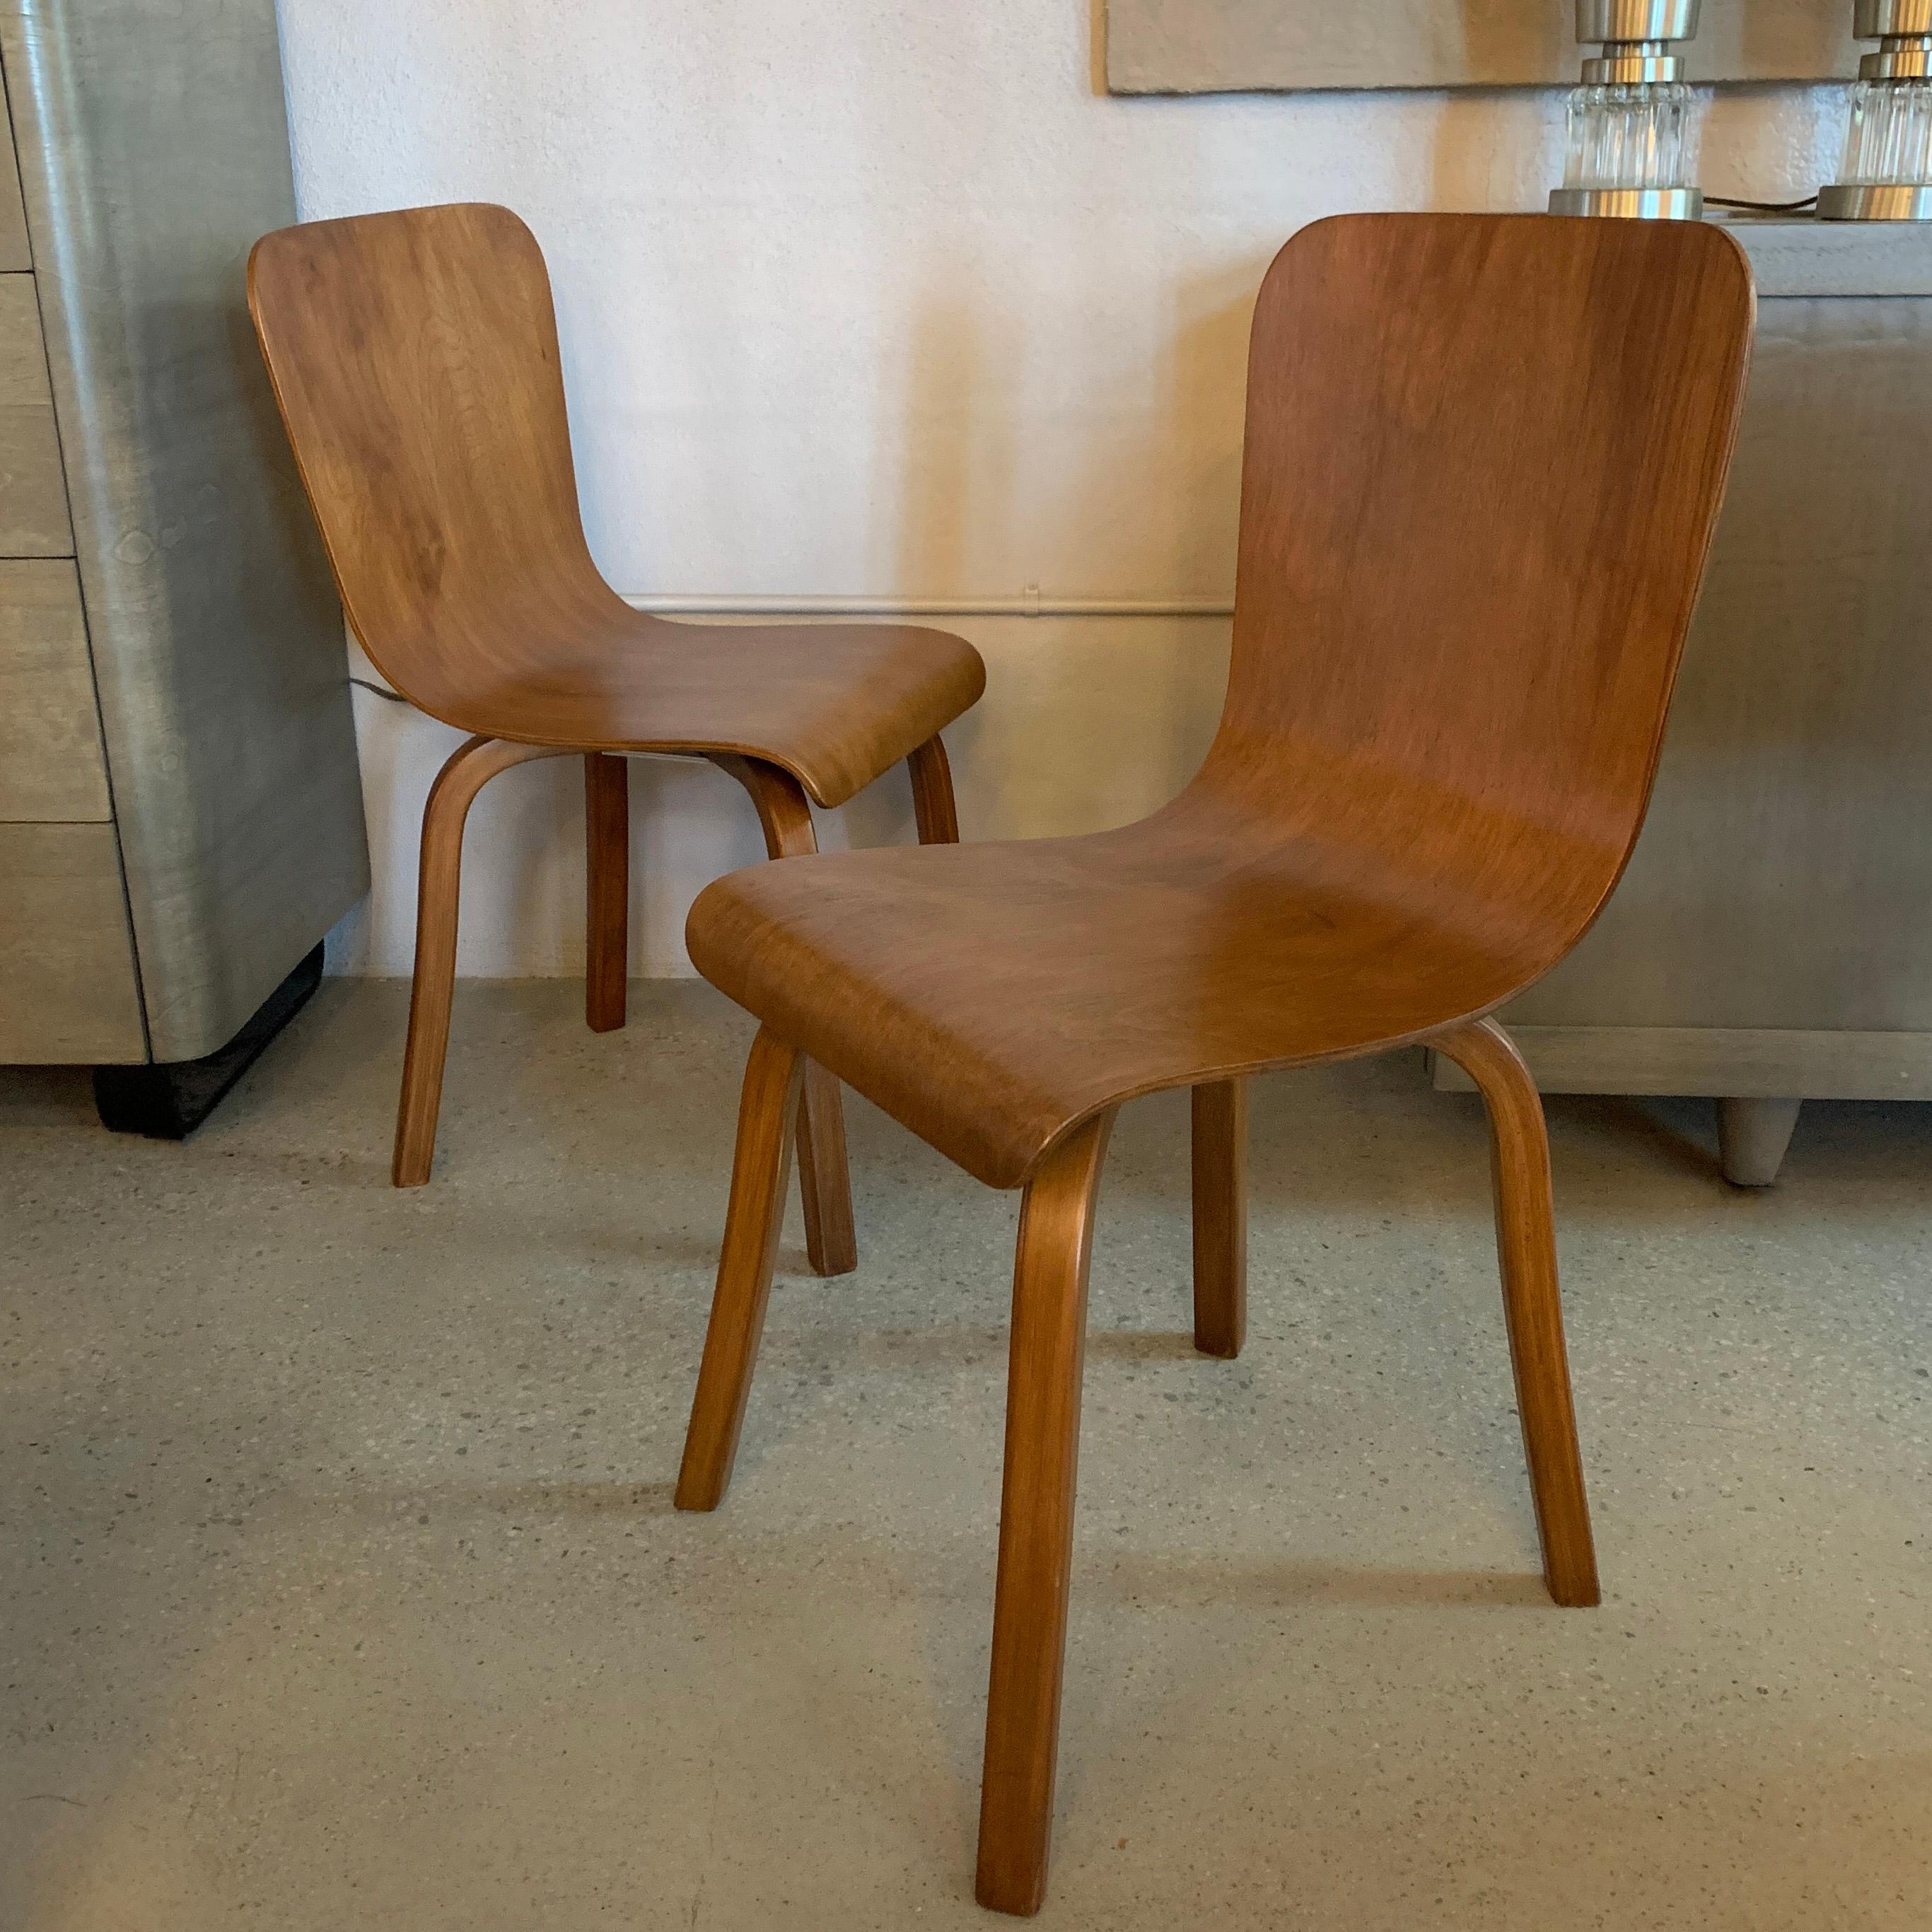 Pair of Mid-Century Modern, bent birch ply side chairs in the manner of Thaden Jordan or Thonet.